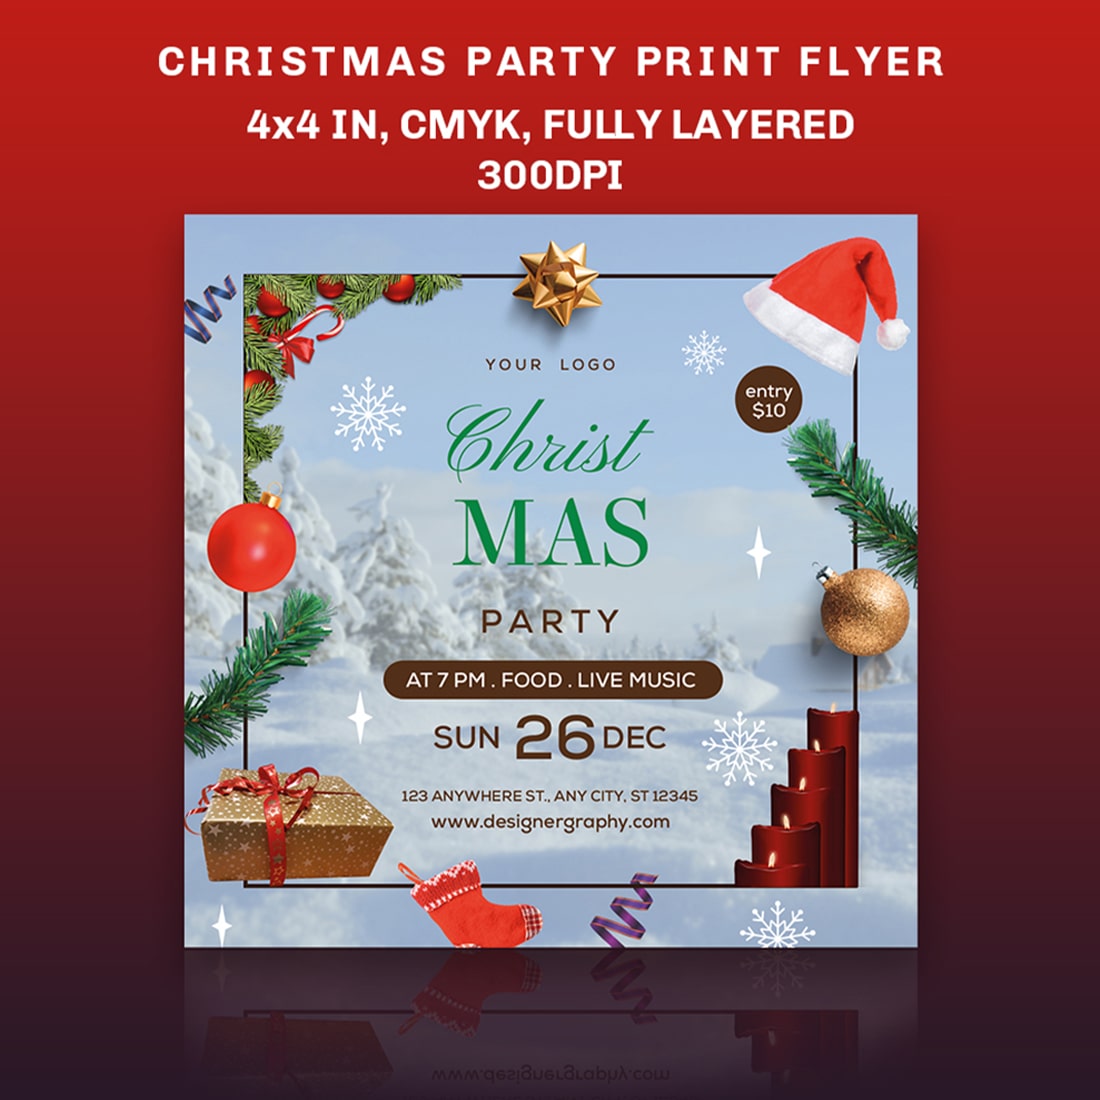 Printable Christmas Event Party Flyer cover image.